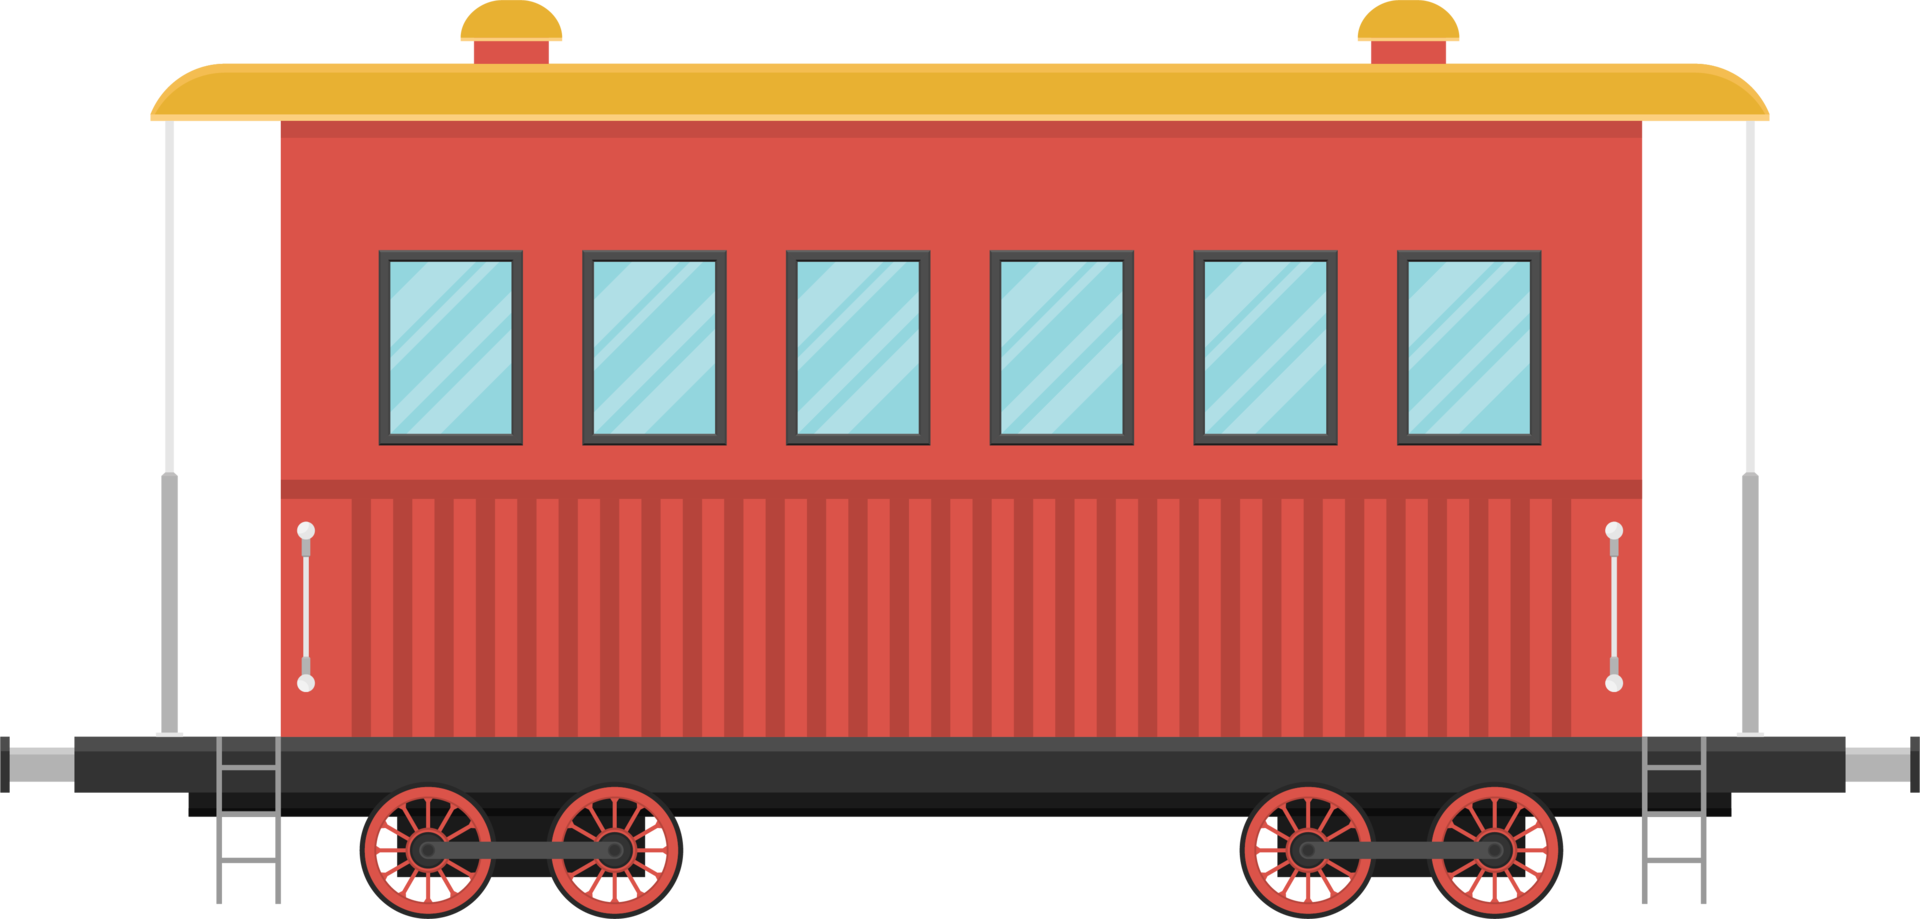 Free Train wagons vector illustration isolated on white background 9314296  PNG with Transparent Background